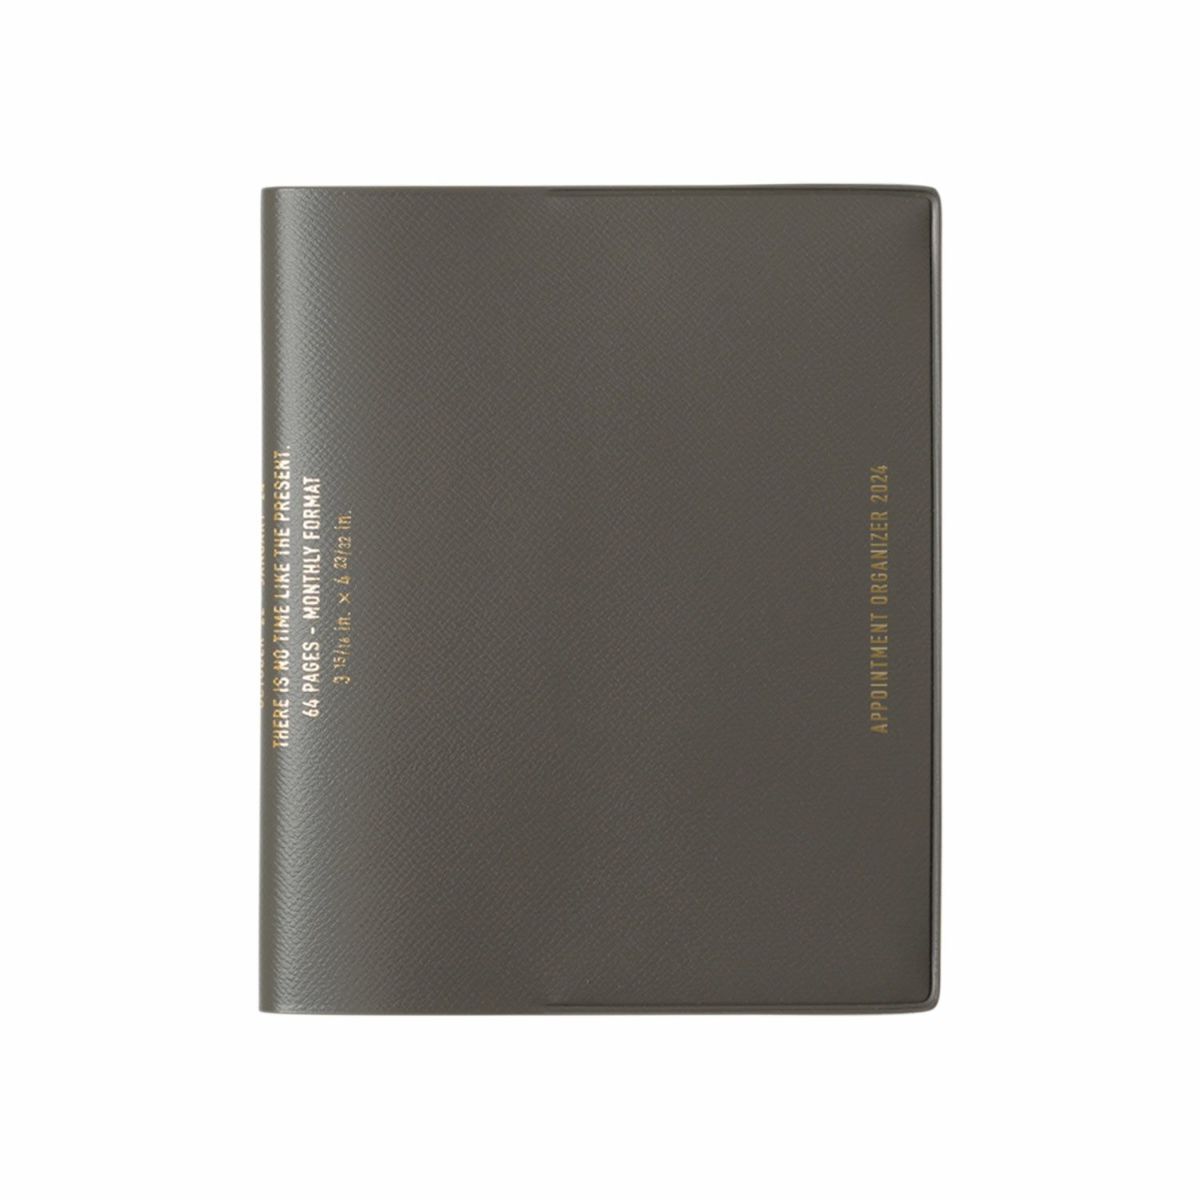 2024 Monthly Planner Houma Square